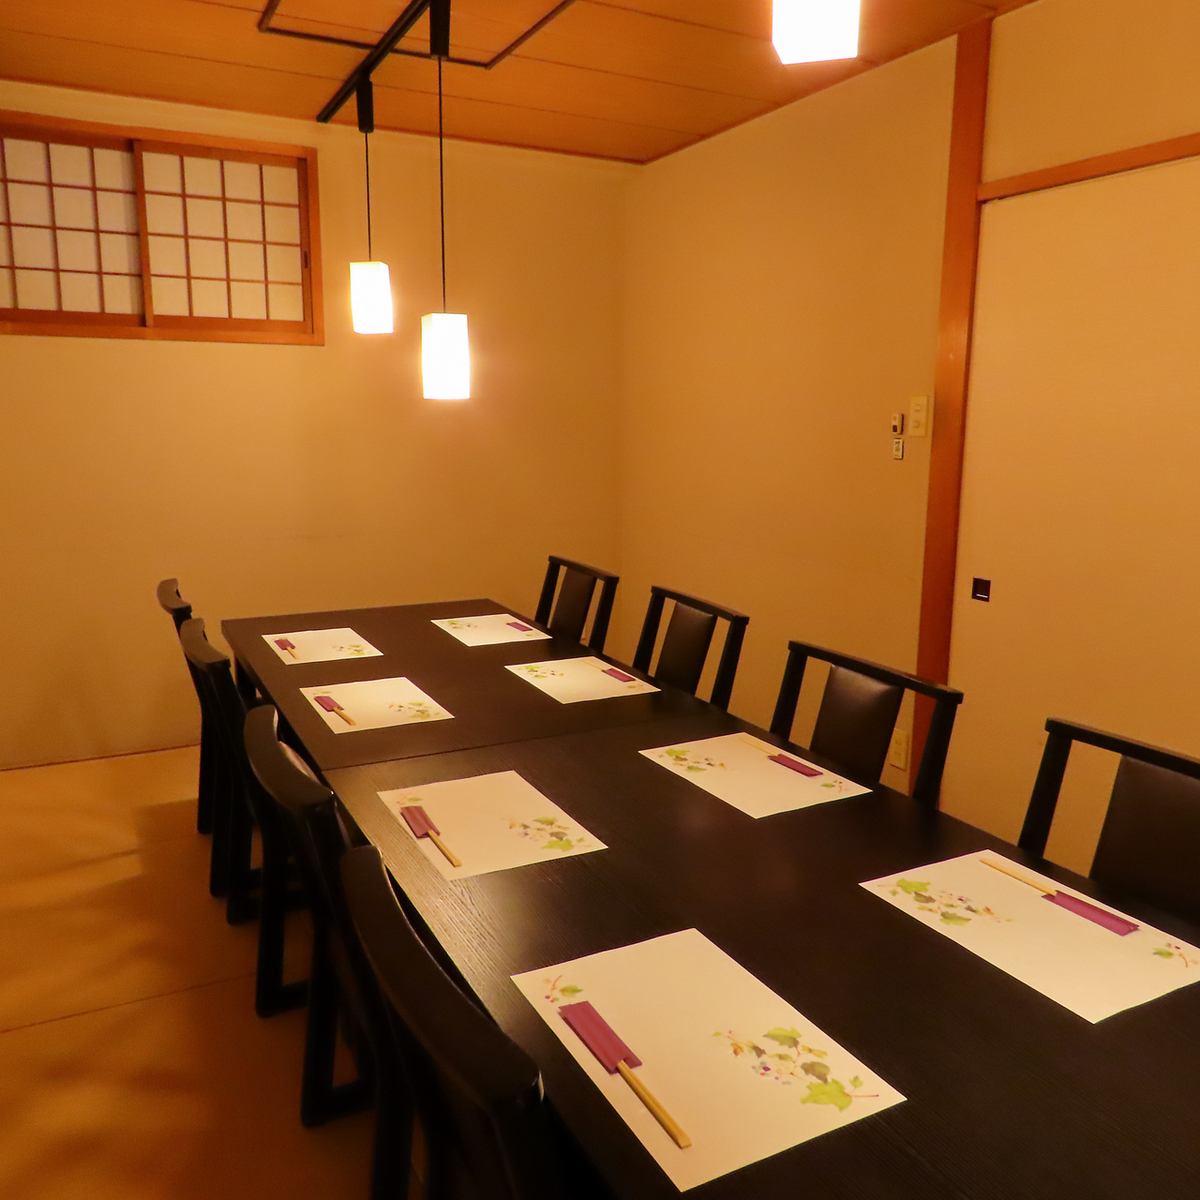 We have a private room that can accommodate up to 12 people.